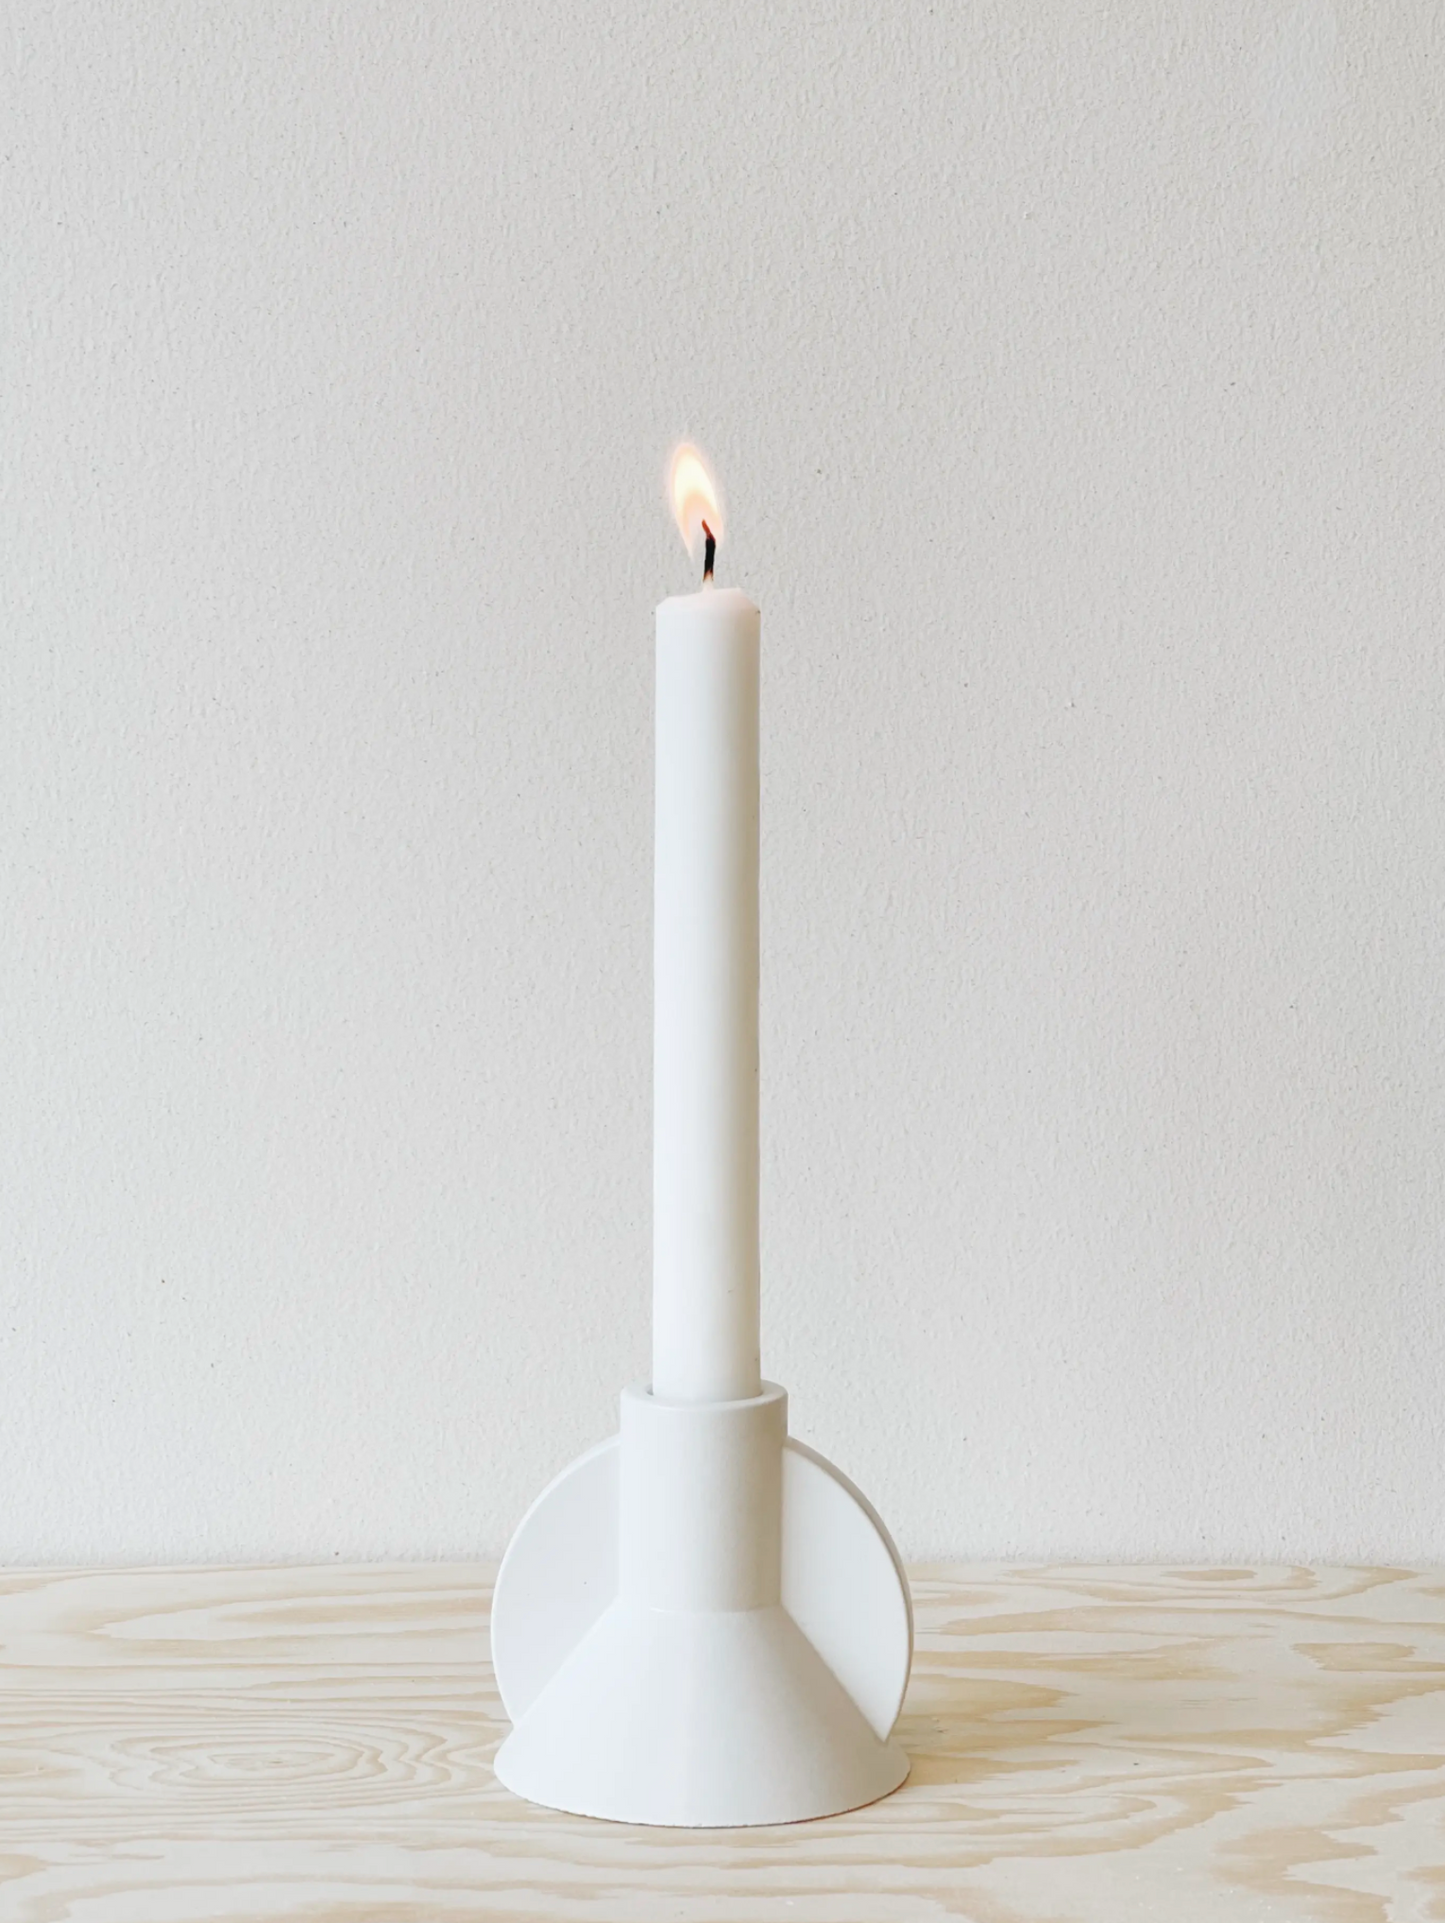 Concrete Candlestick Holders